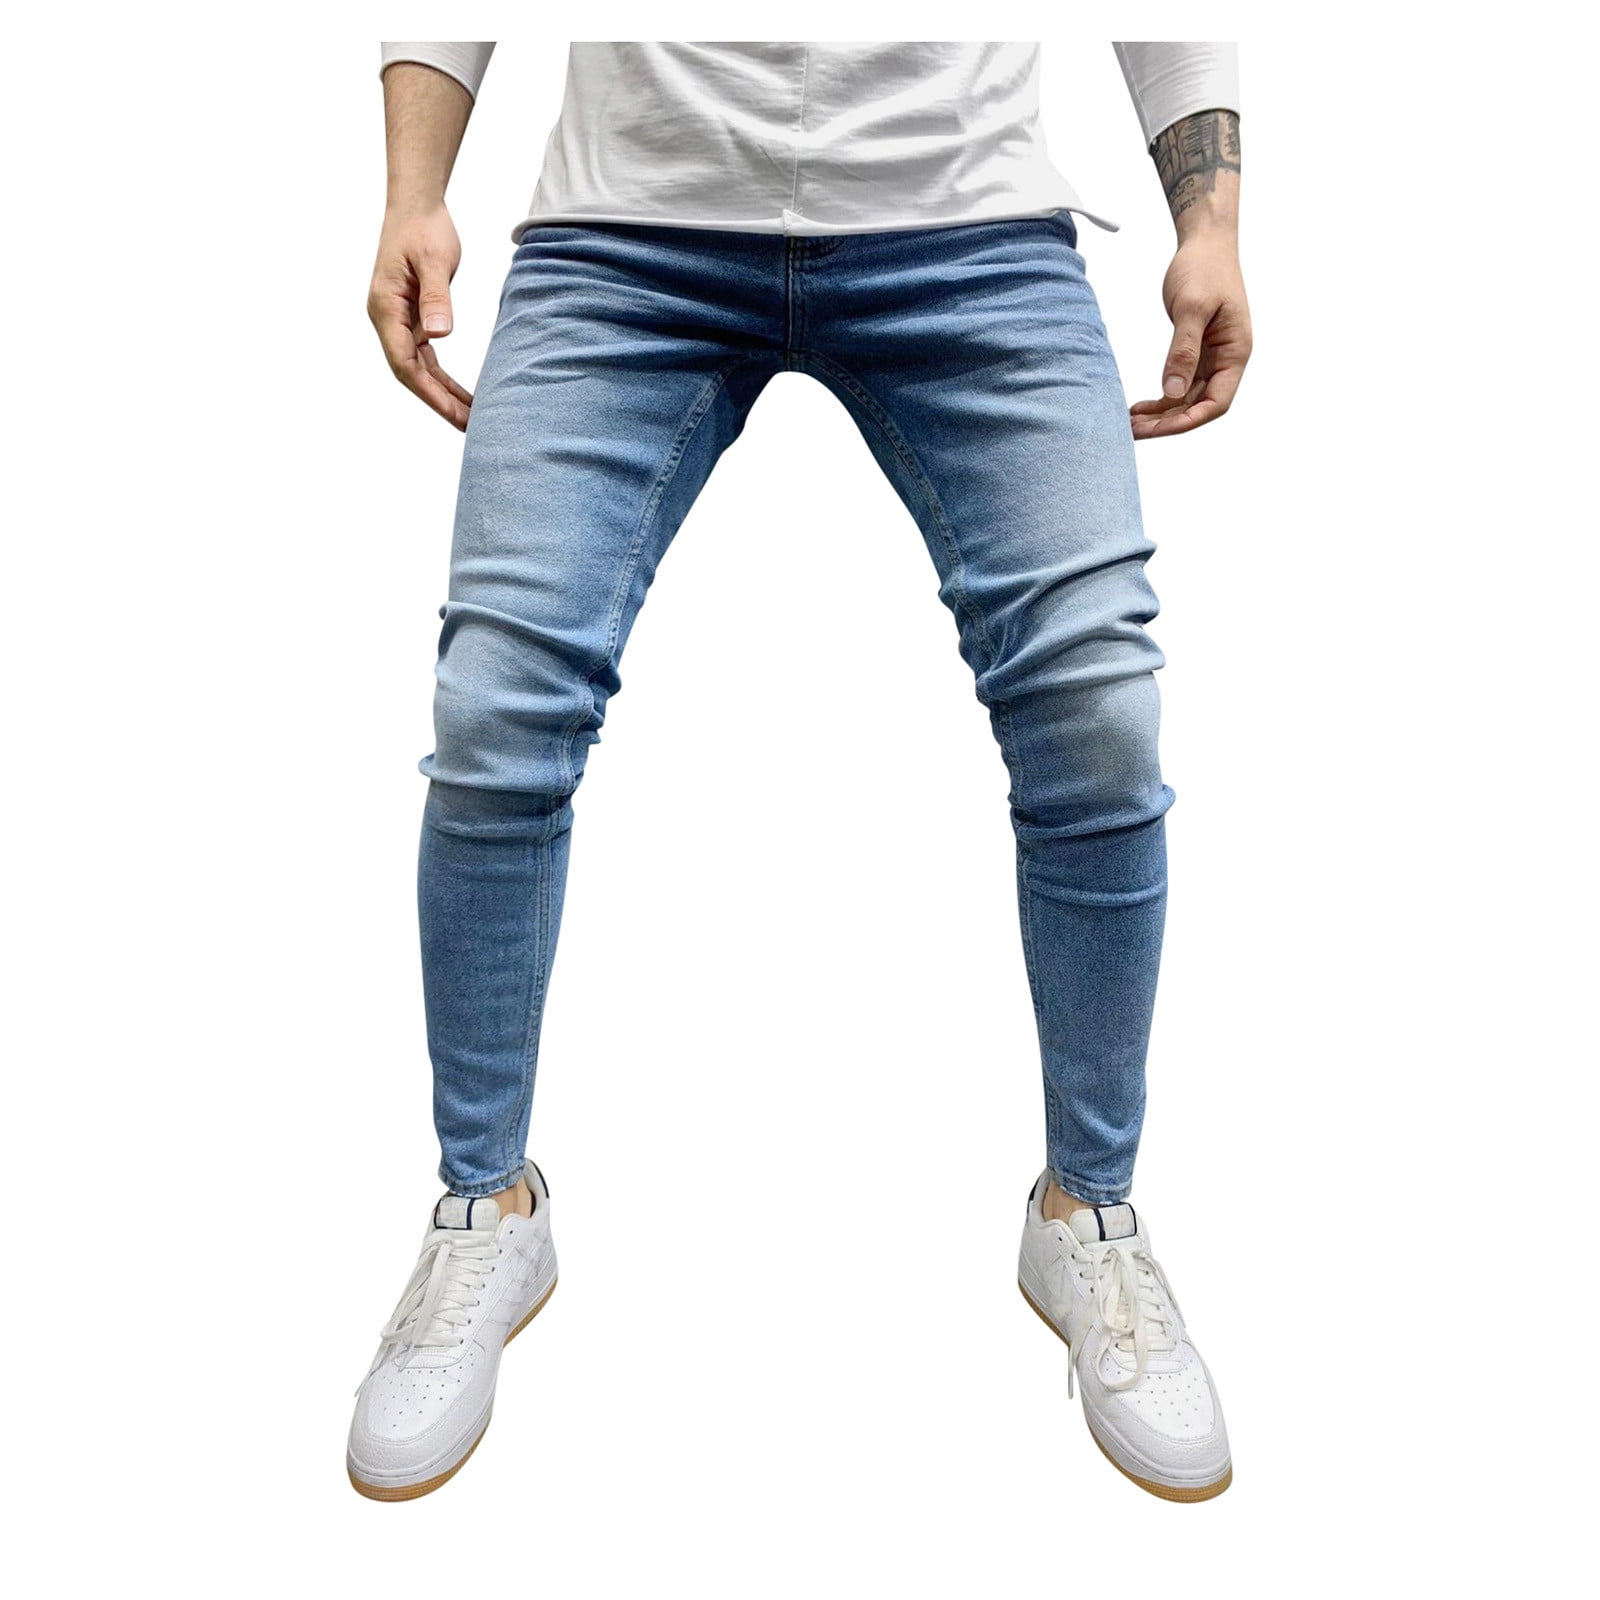 2022 Mens Casual Bodybuilding Jeans With Pocket, Full Length Mens Skinny  Track Pants For Men Vestalon Homme Ropa G0104 From Sihuai03, $21.6